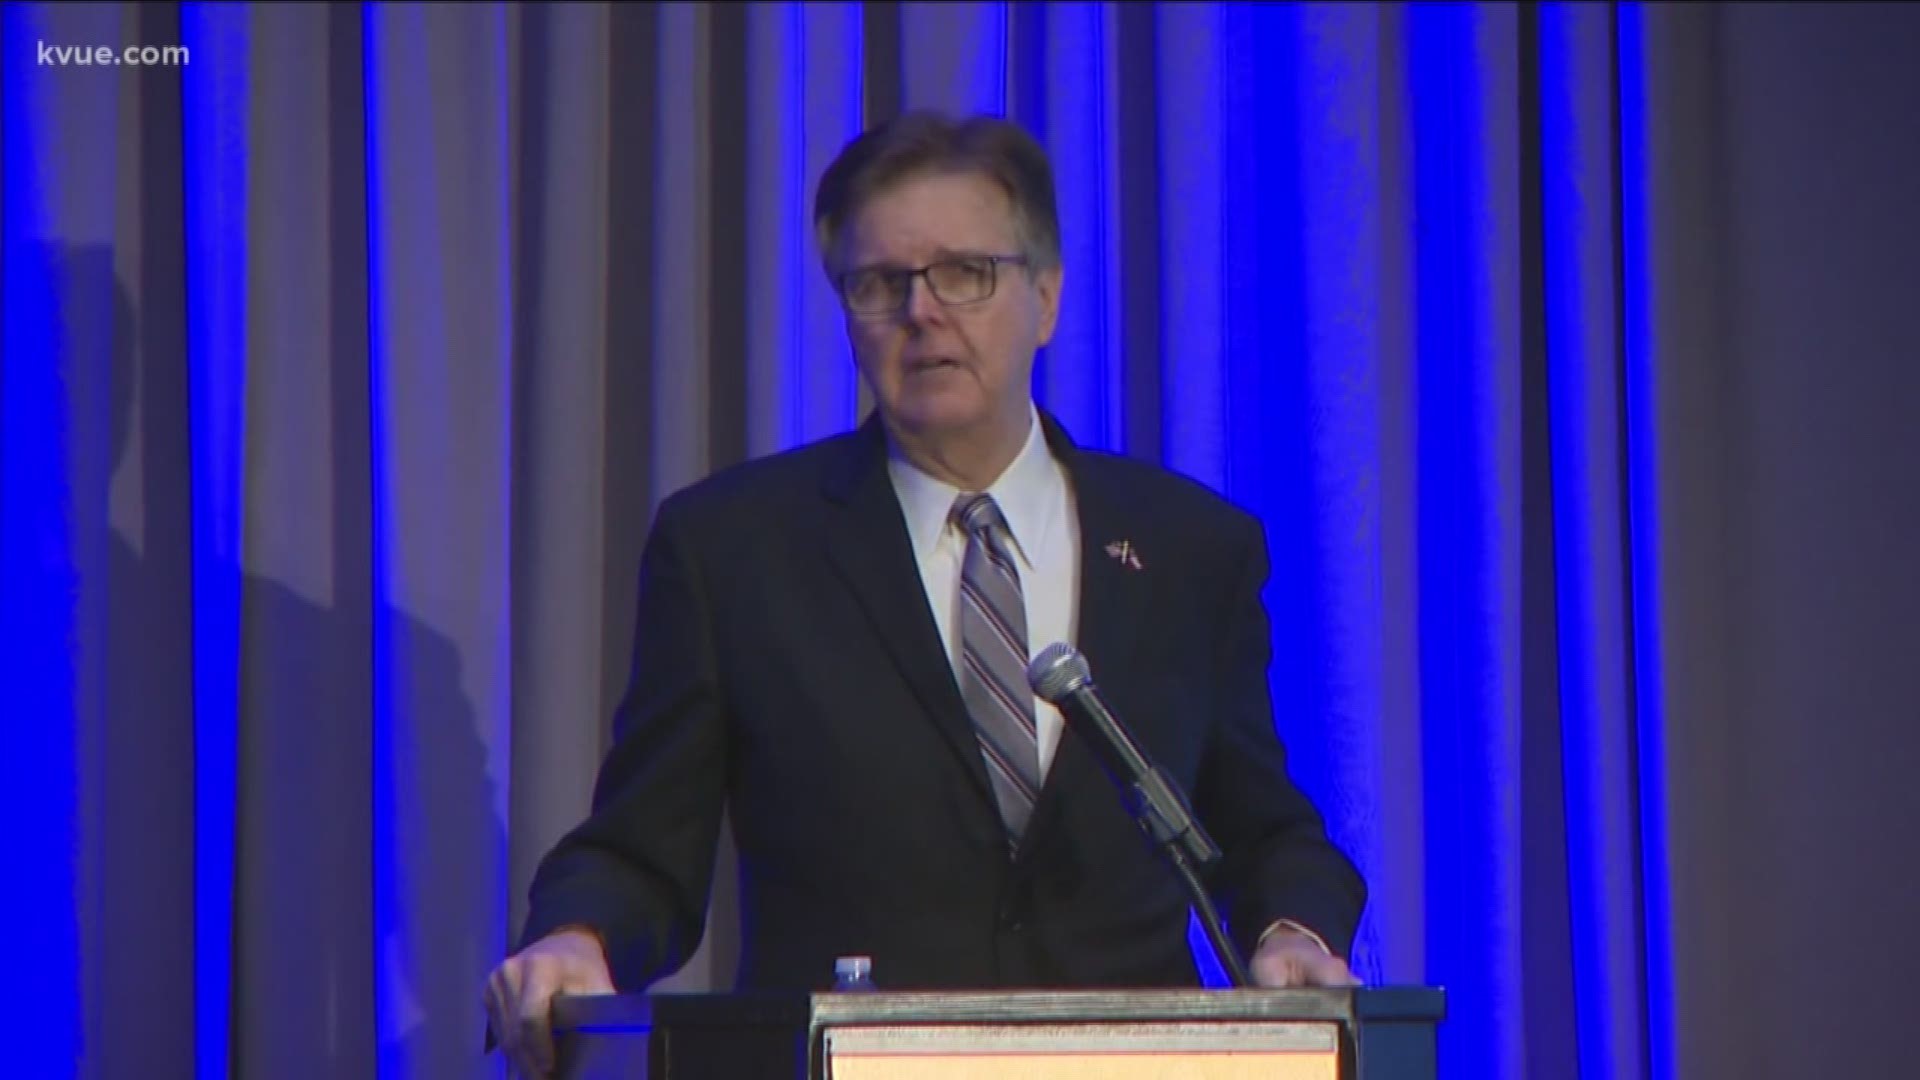 Lt. Gov. Dan Patrick talked to reporters about his offer to the president to have Texas help build the border wall.